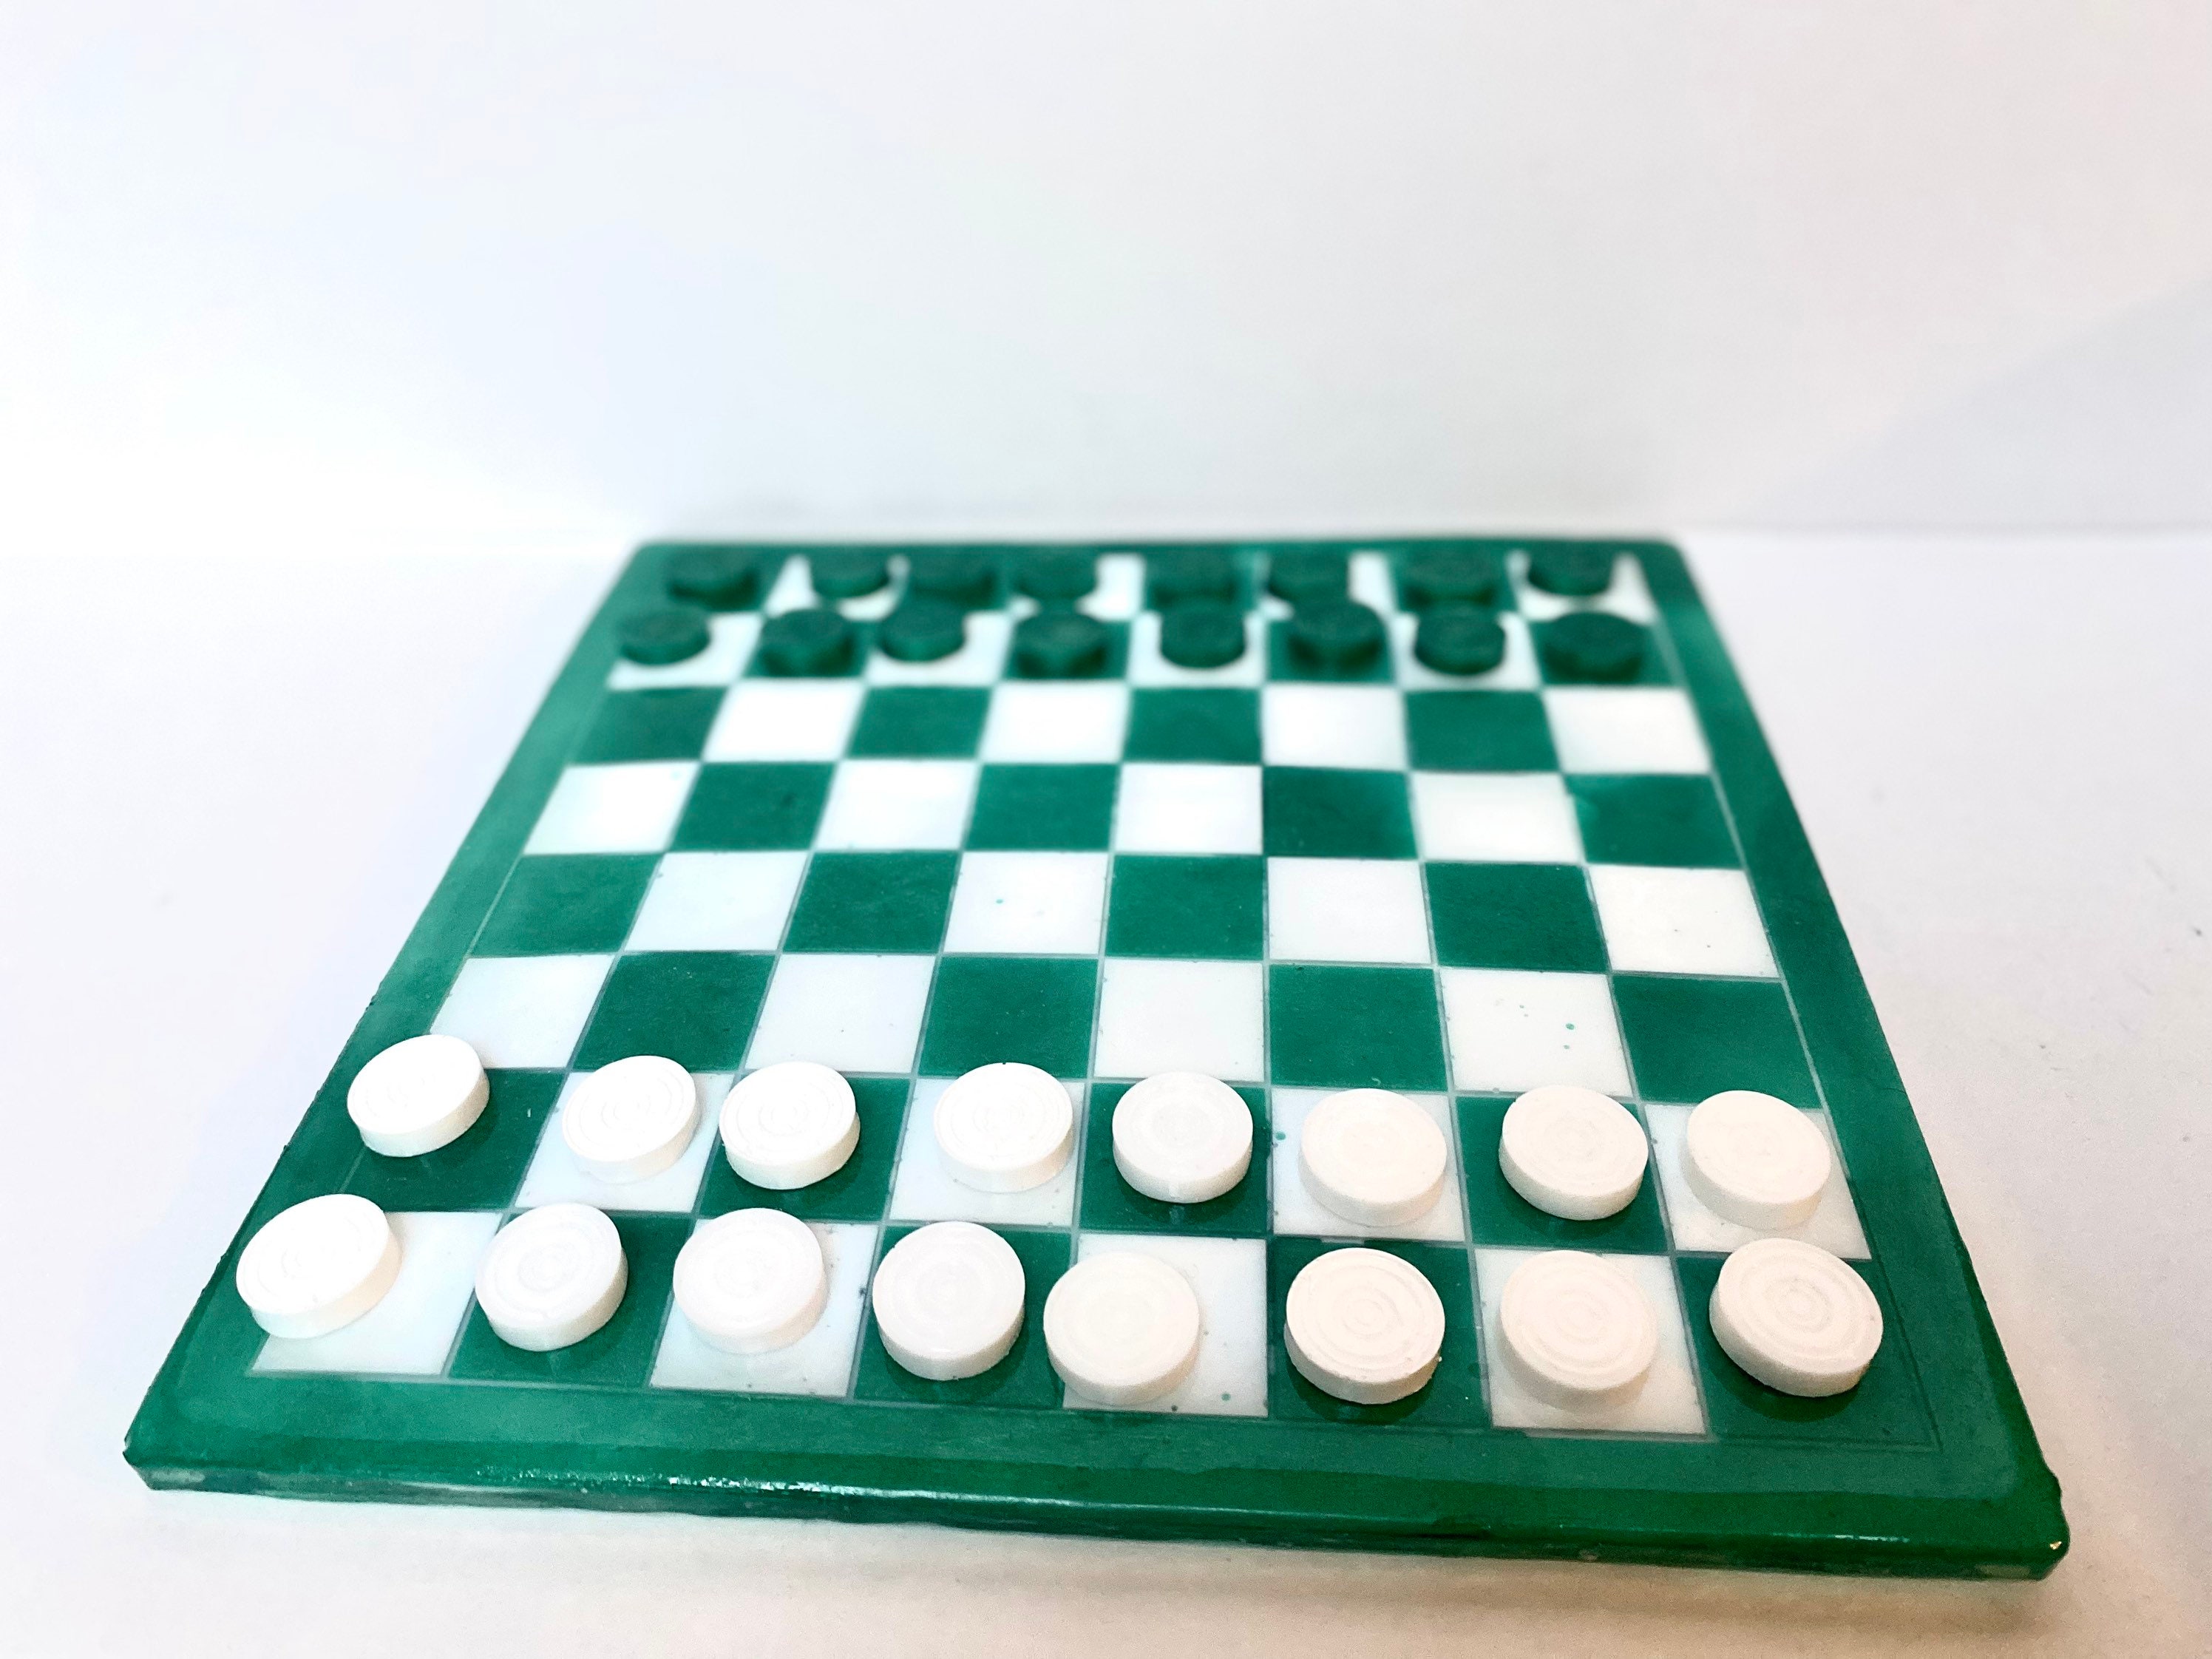 RUSSIAN CHECKERS (SHASHKI) — play against computer or real people